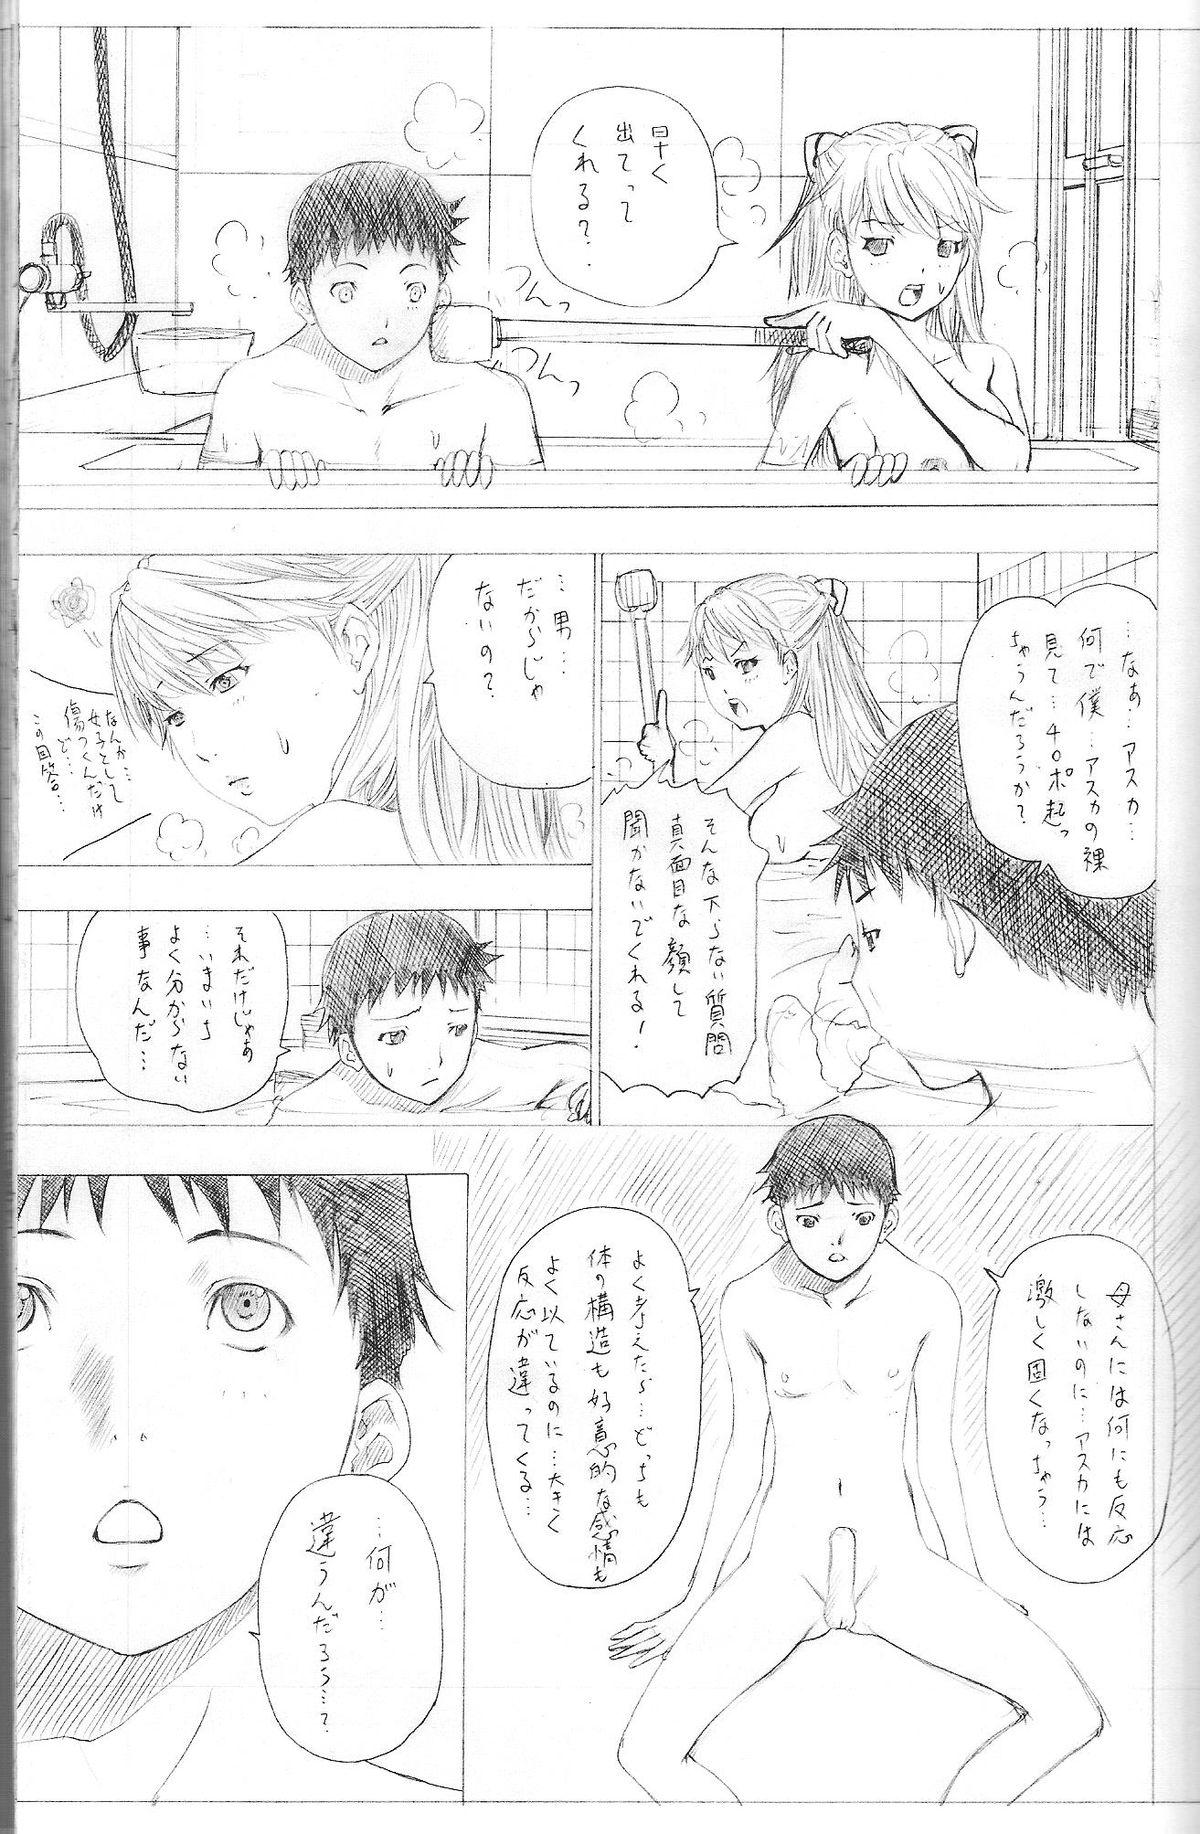 Play 2010 ONLY ASKA WINTER pilot version - Neon genesis evangelion Francaise - Page 4